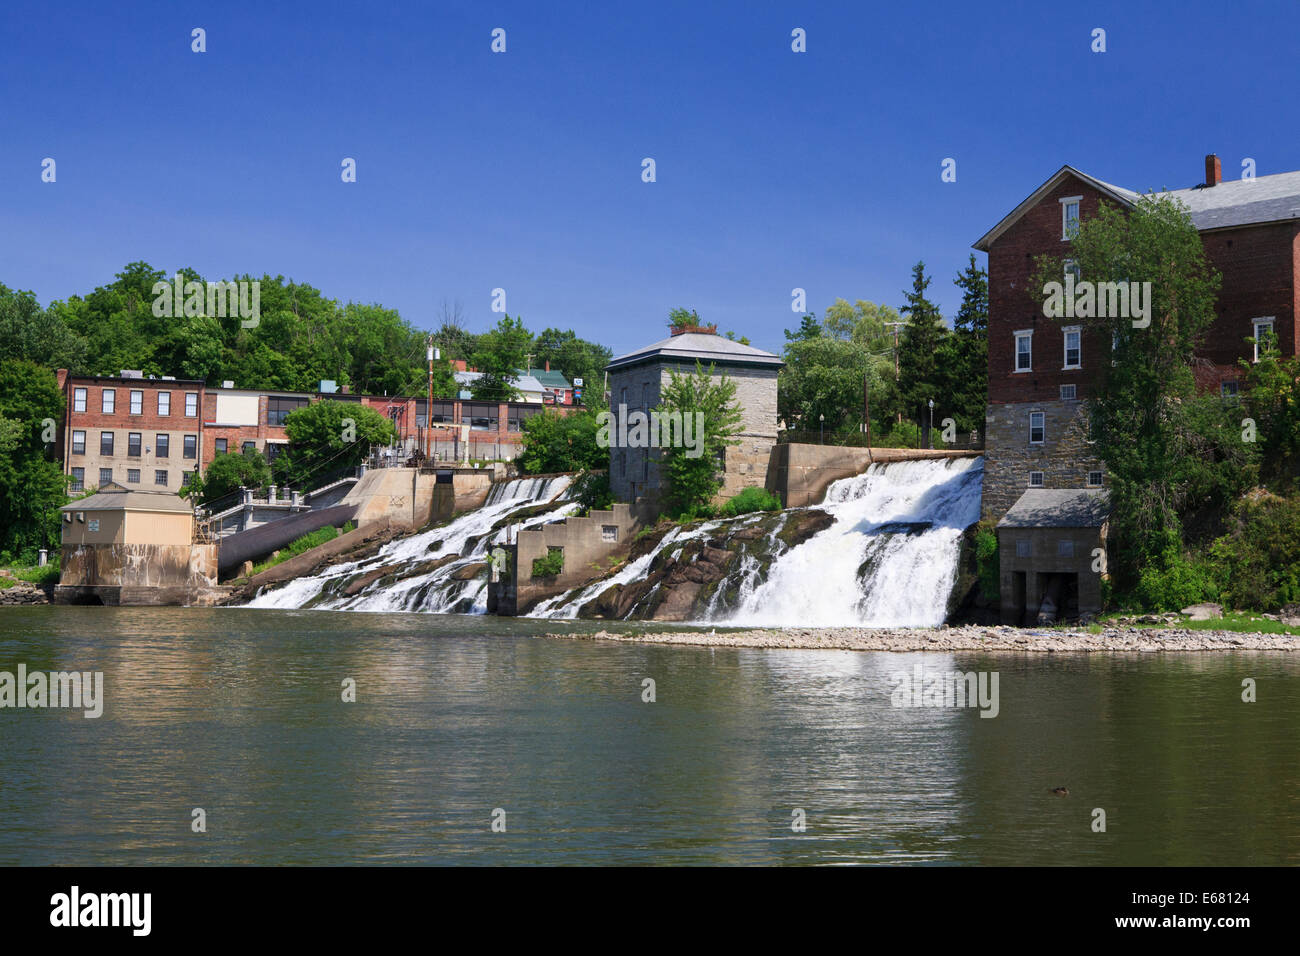 Charles Gravier de Vergennes Downtown-businesses-and-waterfalls-in-vergennes-vermont-E68124